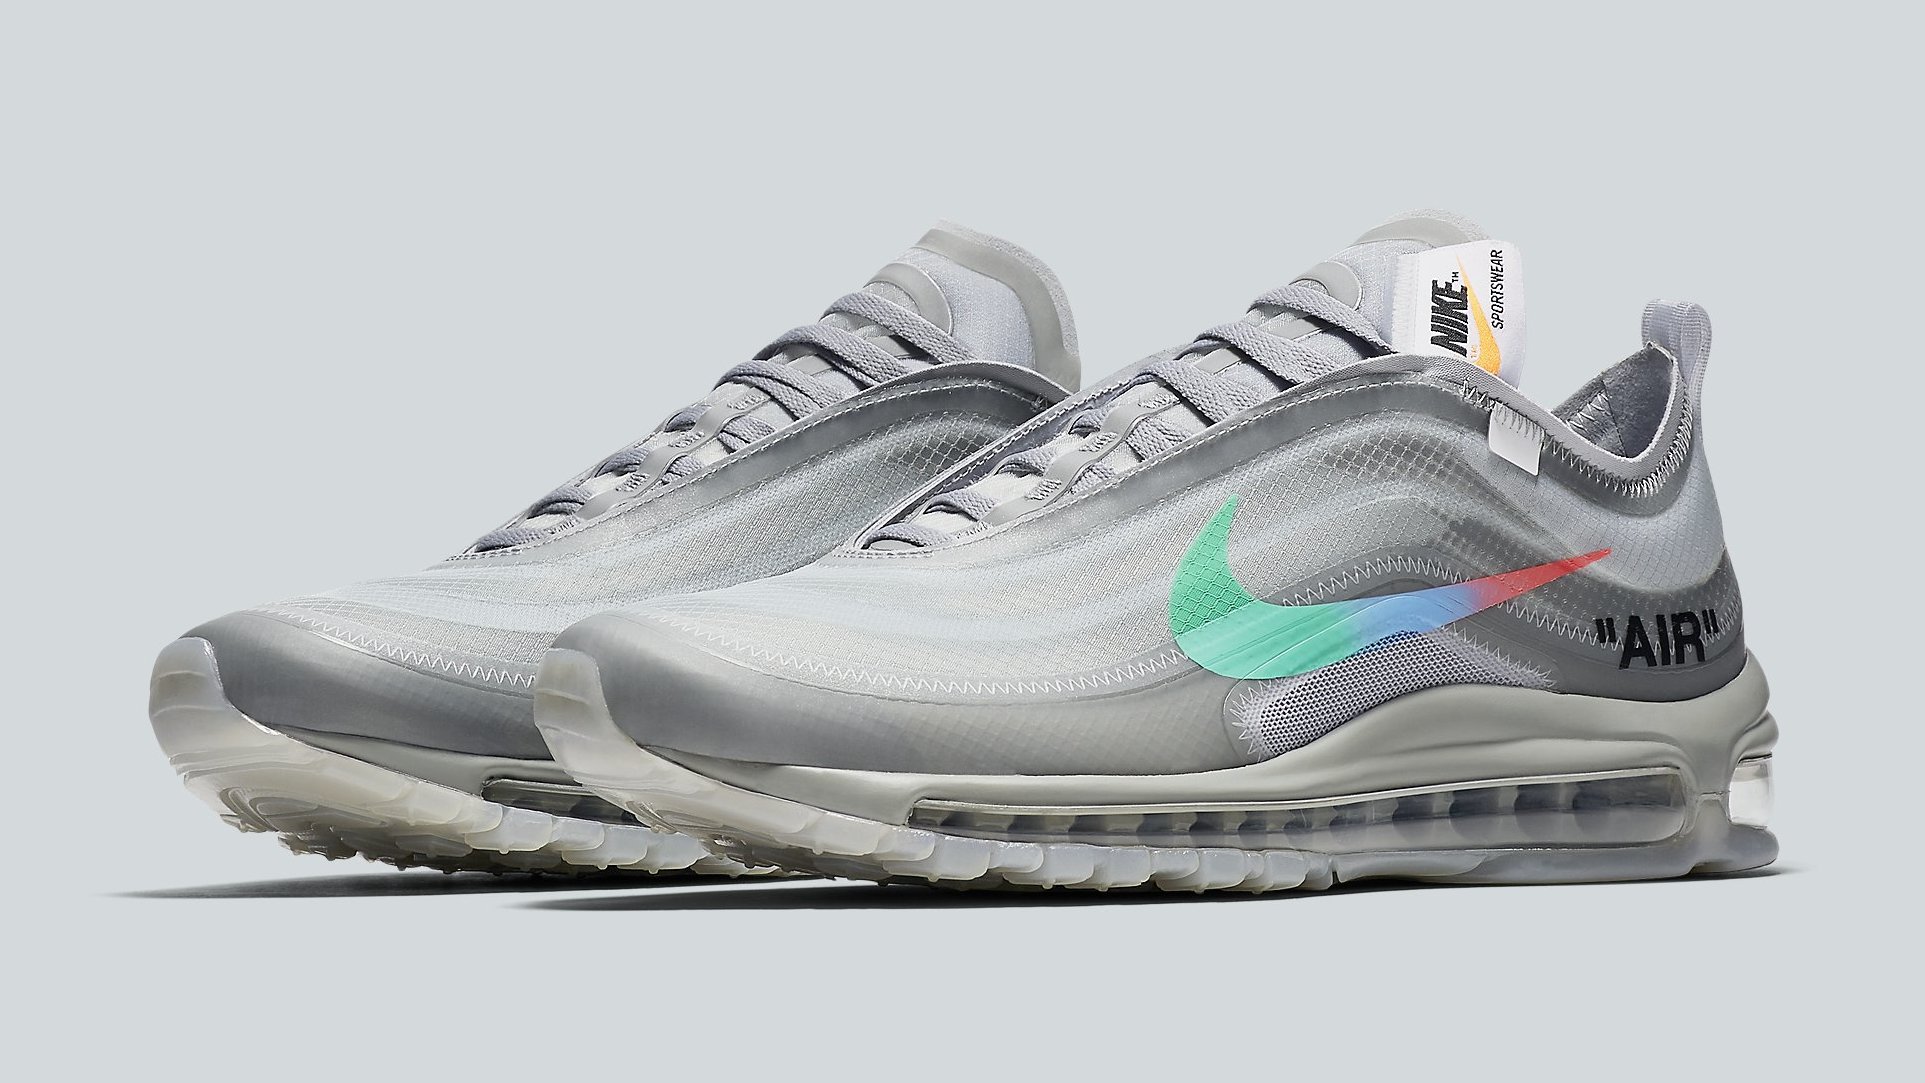 George Hanbury lobby Kinderrijmpjes New Release Information for the 'Menta' Off-White x Air Max 97 | Complex